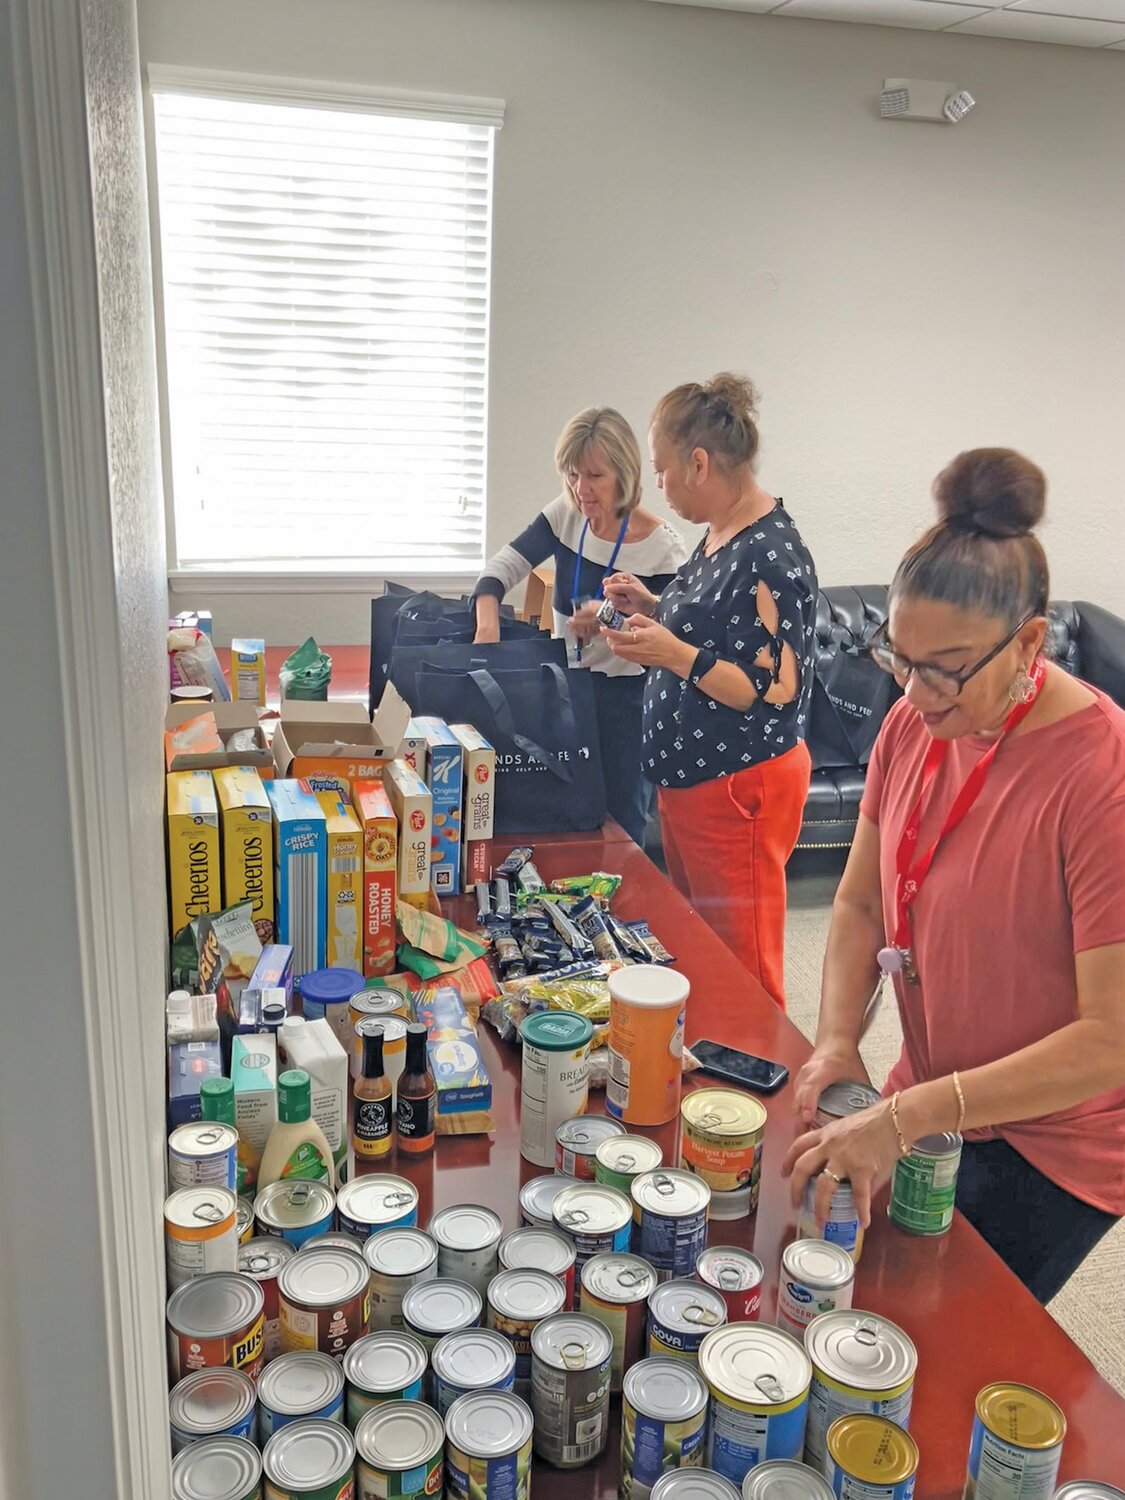 Left to right: Rose Bailey, Martha Winger and Elizabeth Rodriquez sorts food donated to CCKids.